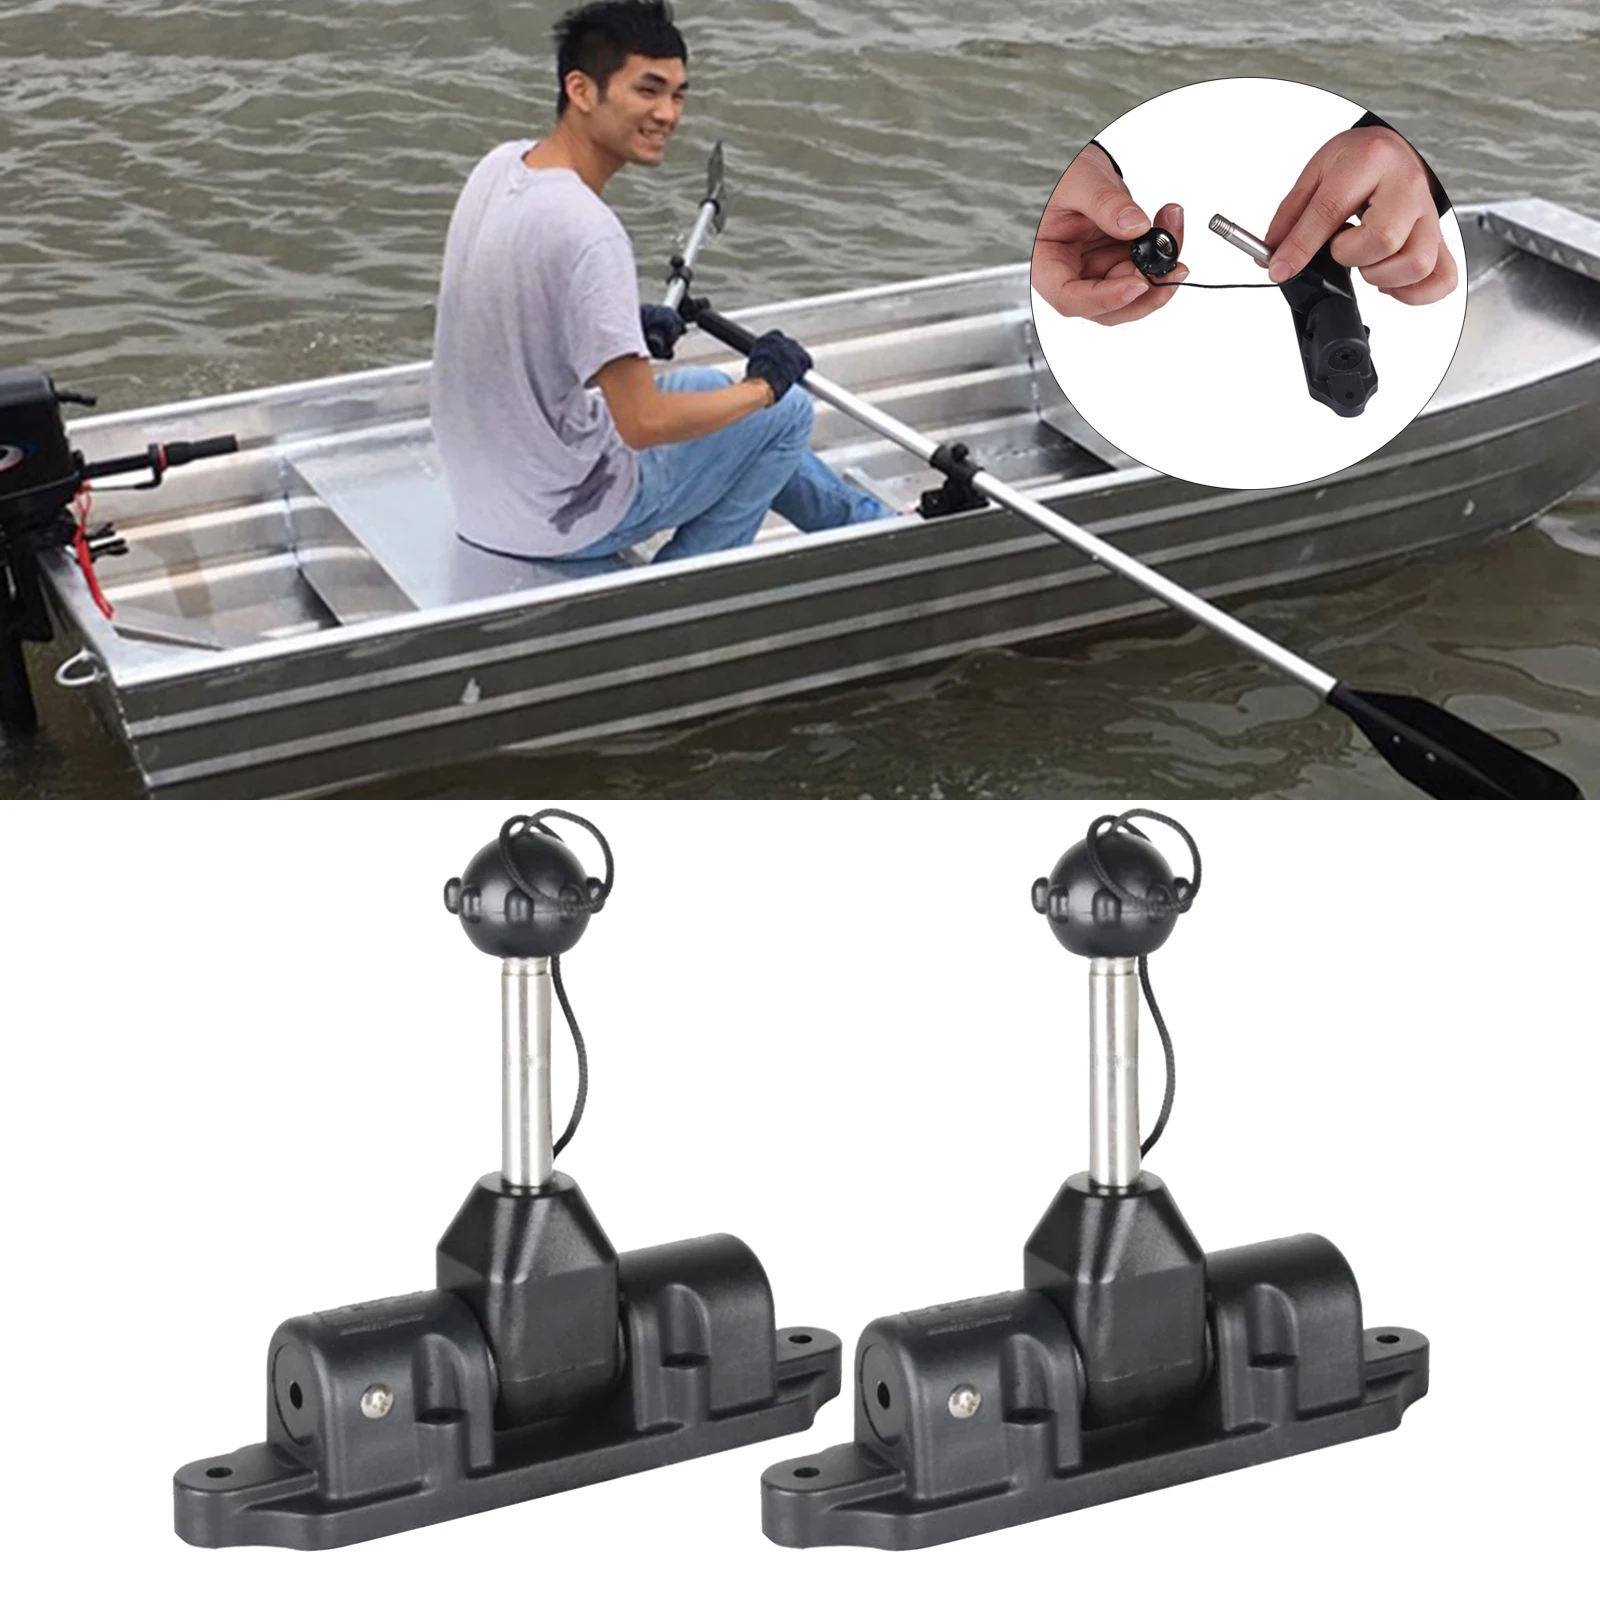 2Pieces Universal Oar Holder Paddle Lock Boat Dinghy Kayak Canoe Accessories